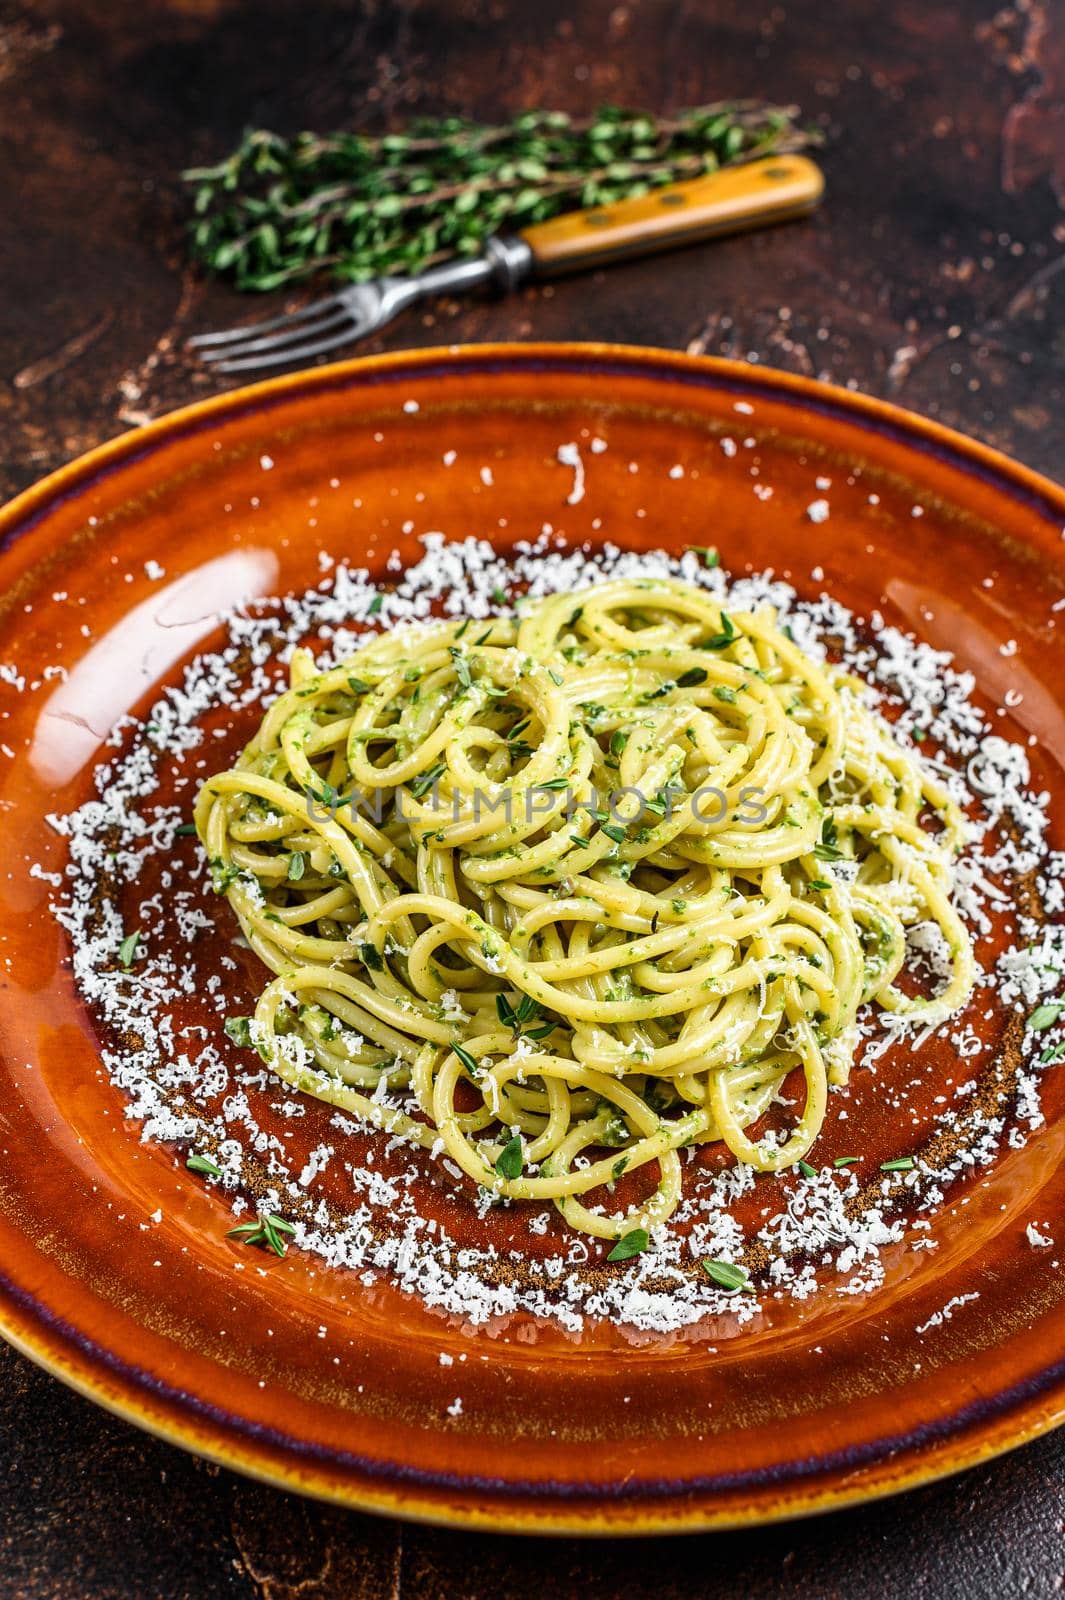 Spinach Spaghetti Pasta with pesto sauce and parmesan. Dark background. Top view.